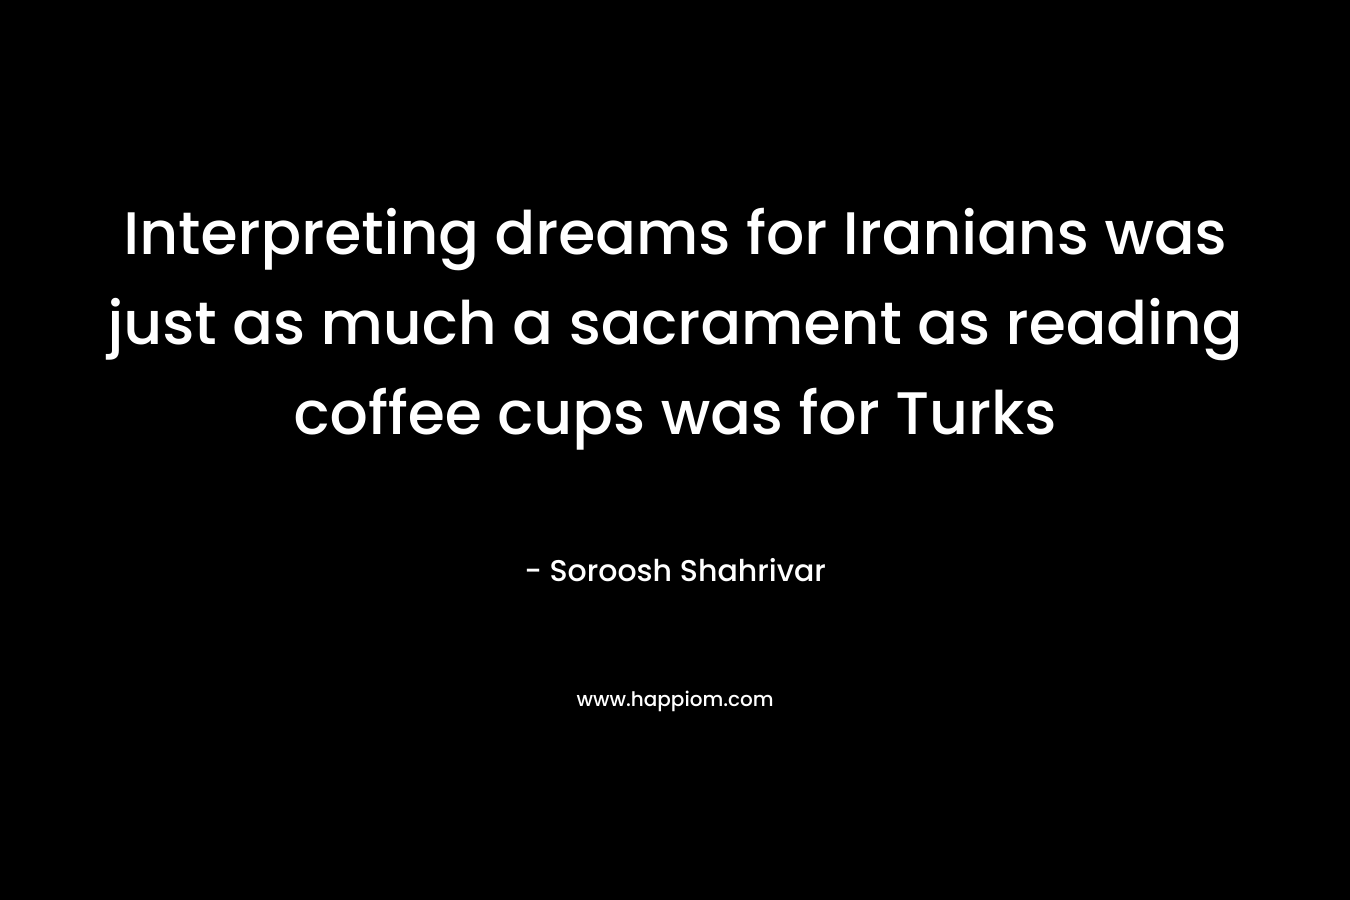 Interpreting dreams for Iranians was just as much a sacrament as reading coffee cups was for Turks – Soroosh Shahrivar